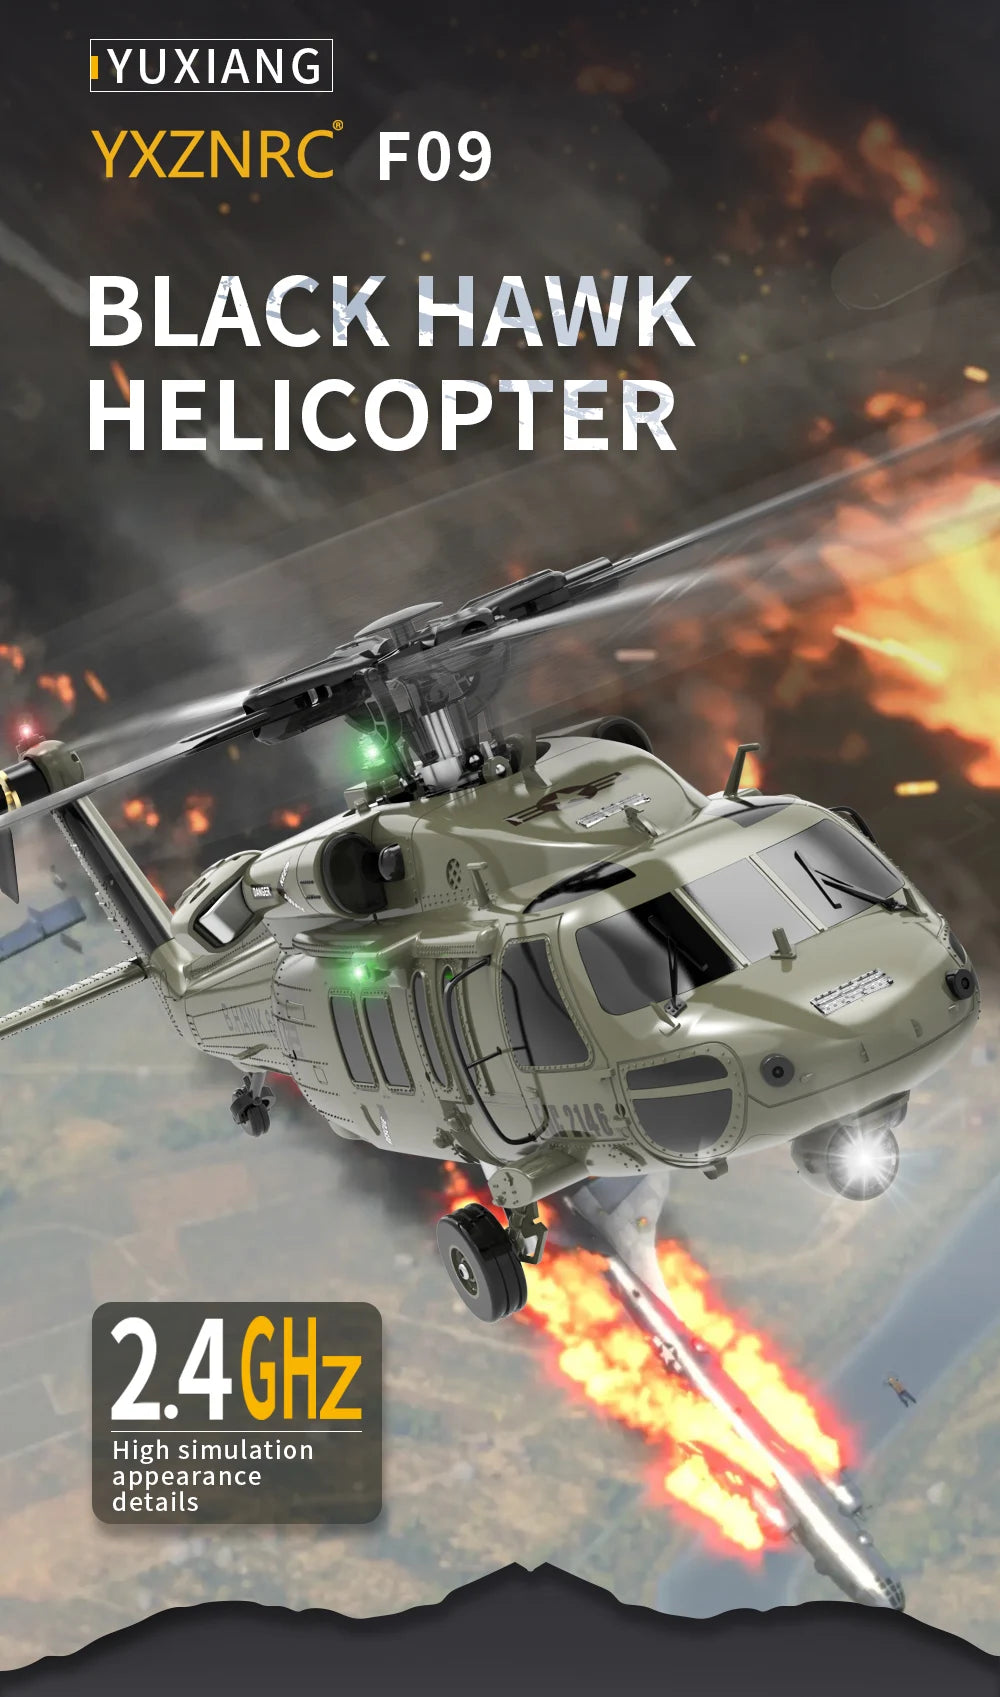 YXZNRC F09 RC Helicopter, FO9 BLACK HAWK HELICOPTER 9446 2.40Hz High simulation appearance